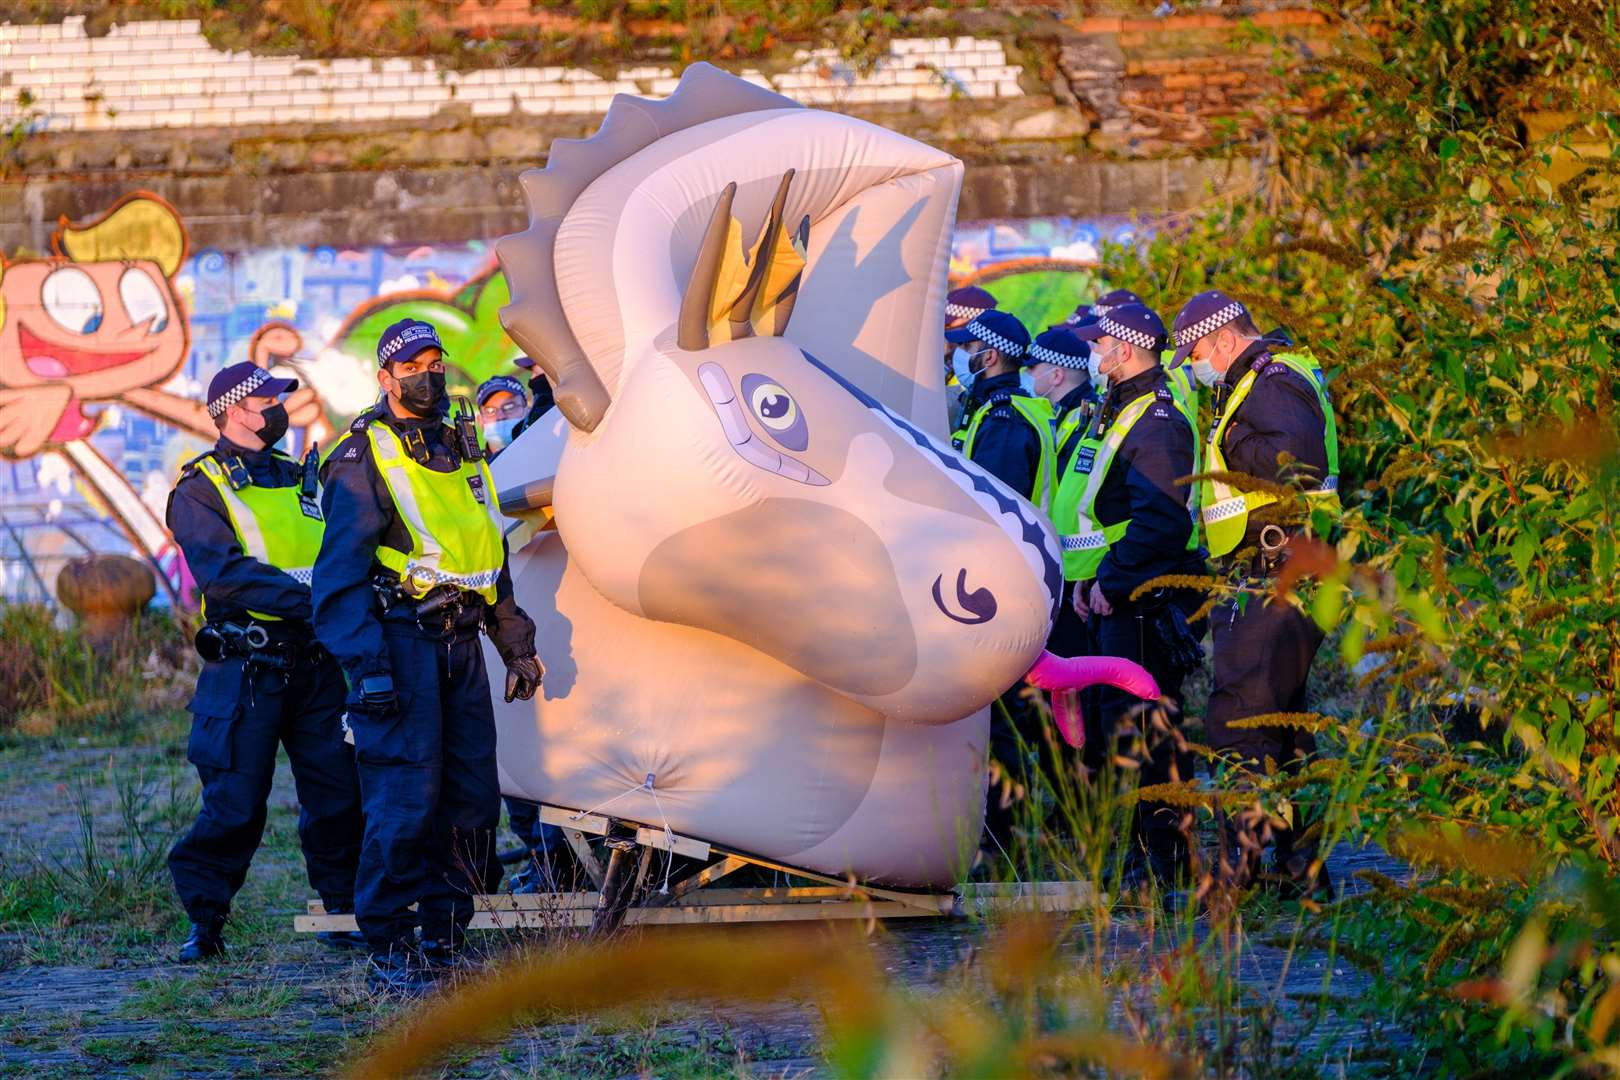 But before the inflatable could be put in the water, it was seized by police for breaching maritime restrictions put in place for the duration of the conference (Jess Hurd/PA)